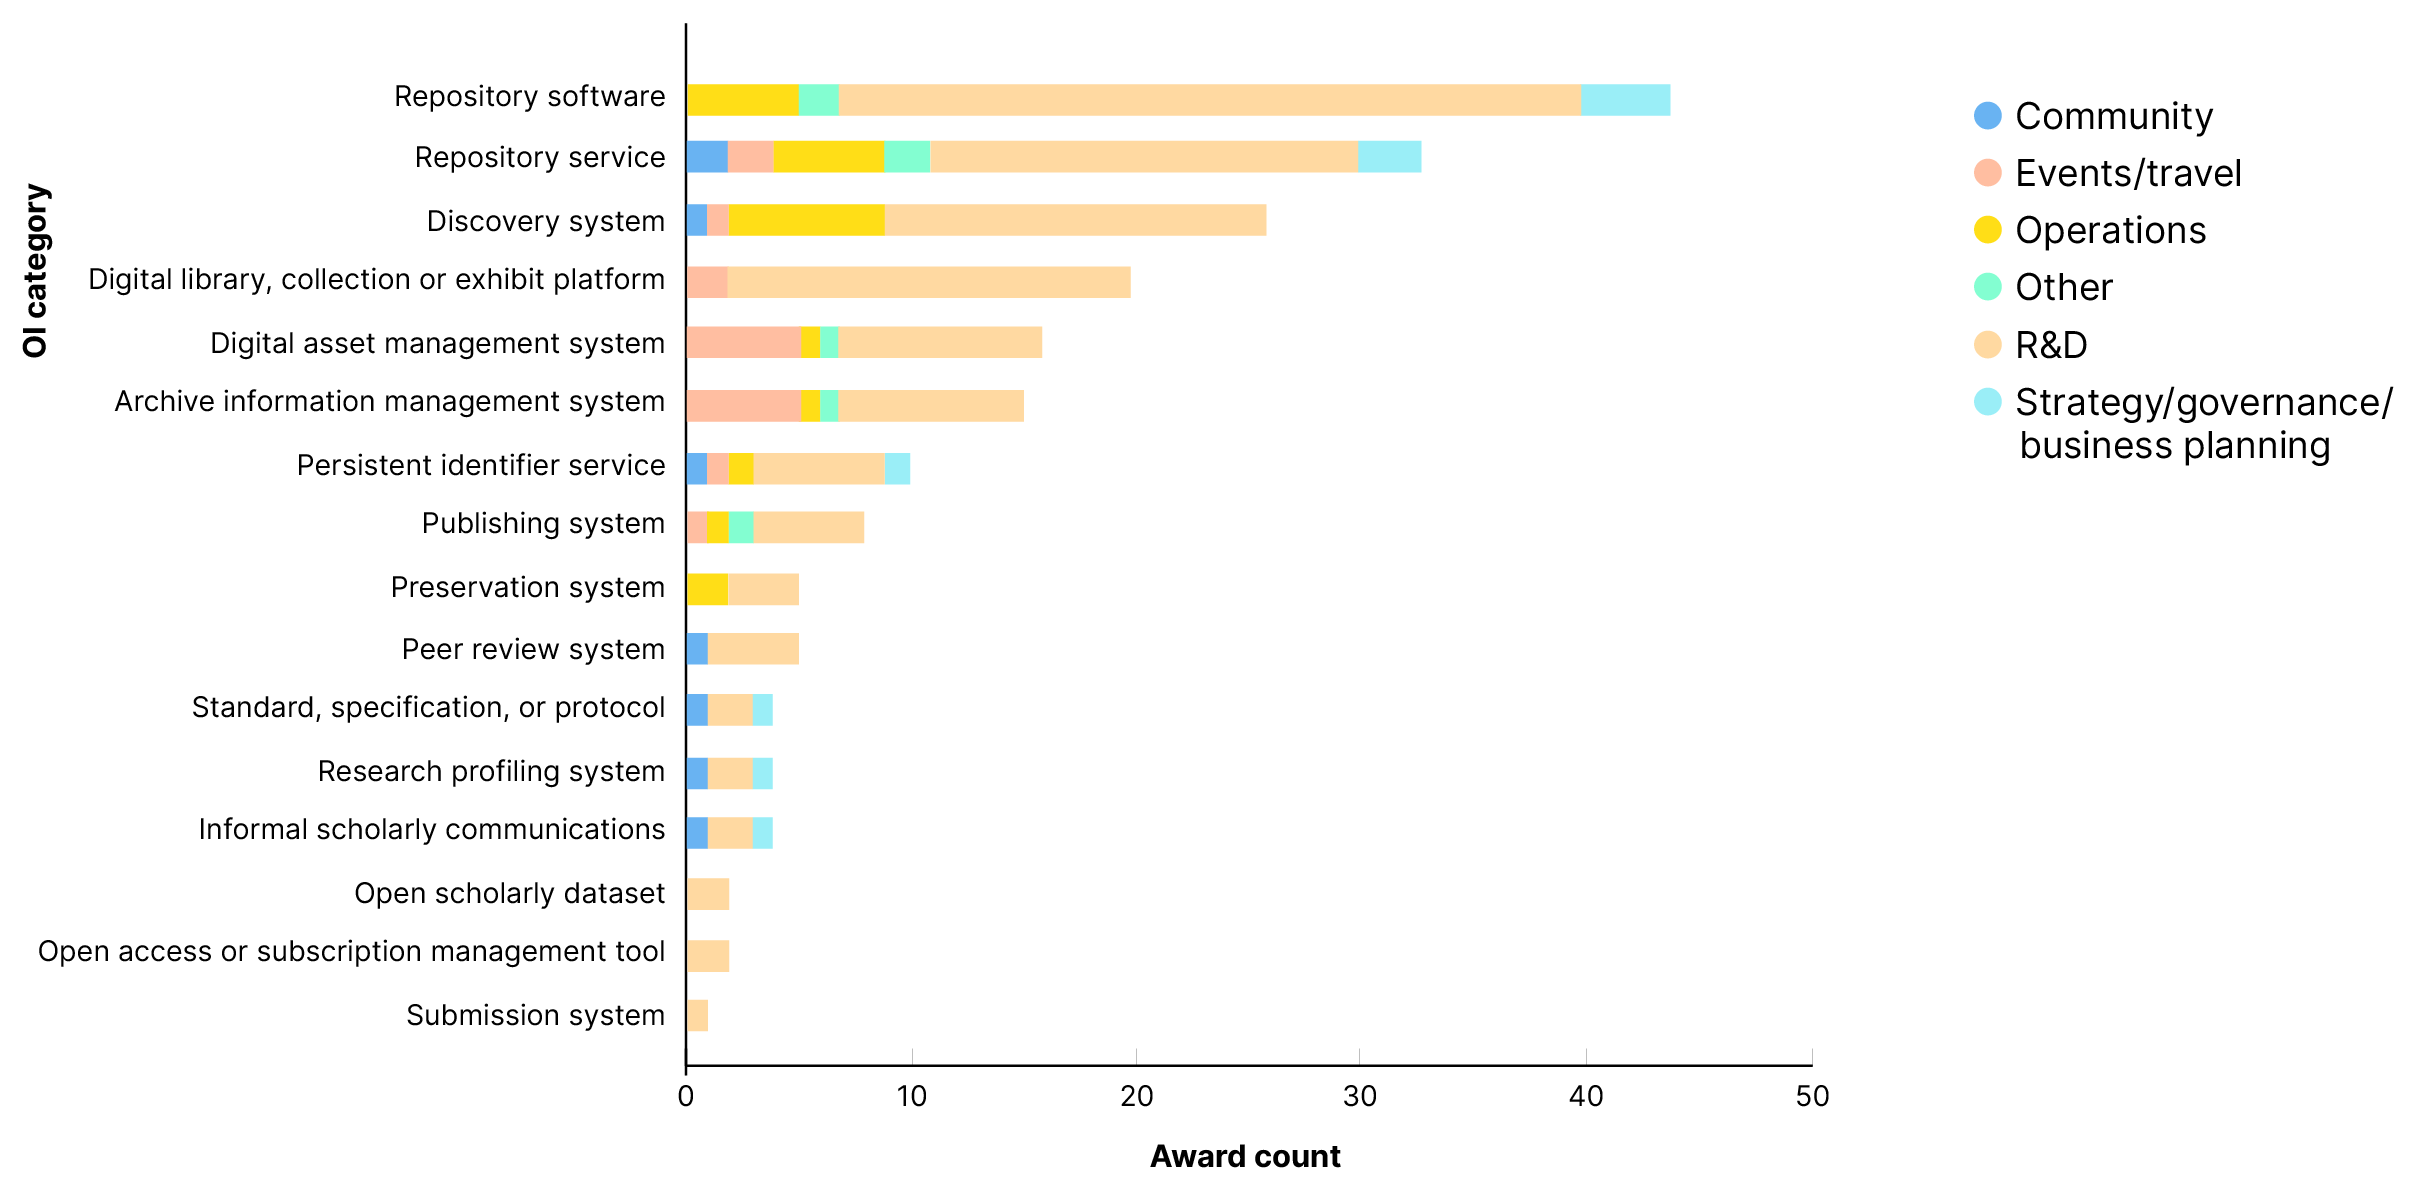 Stacked bar chart showing the number of direct support awards by open infrastructure solution category and by award category. In every solution category, more awards are made for research and development than any other category.